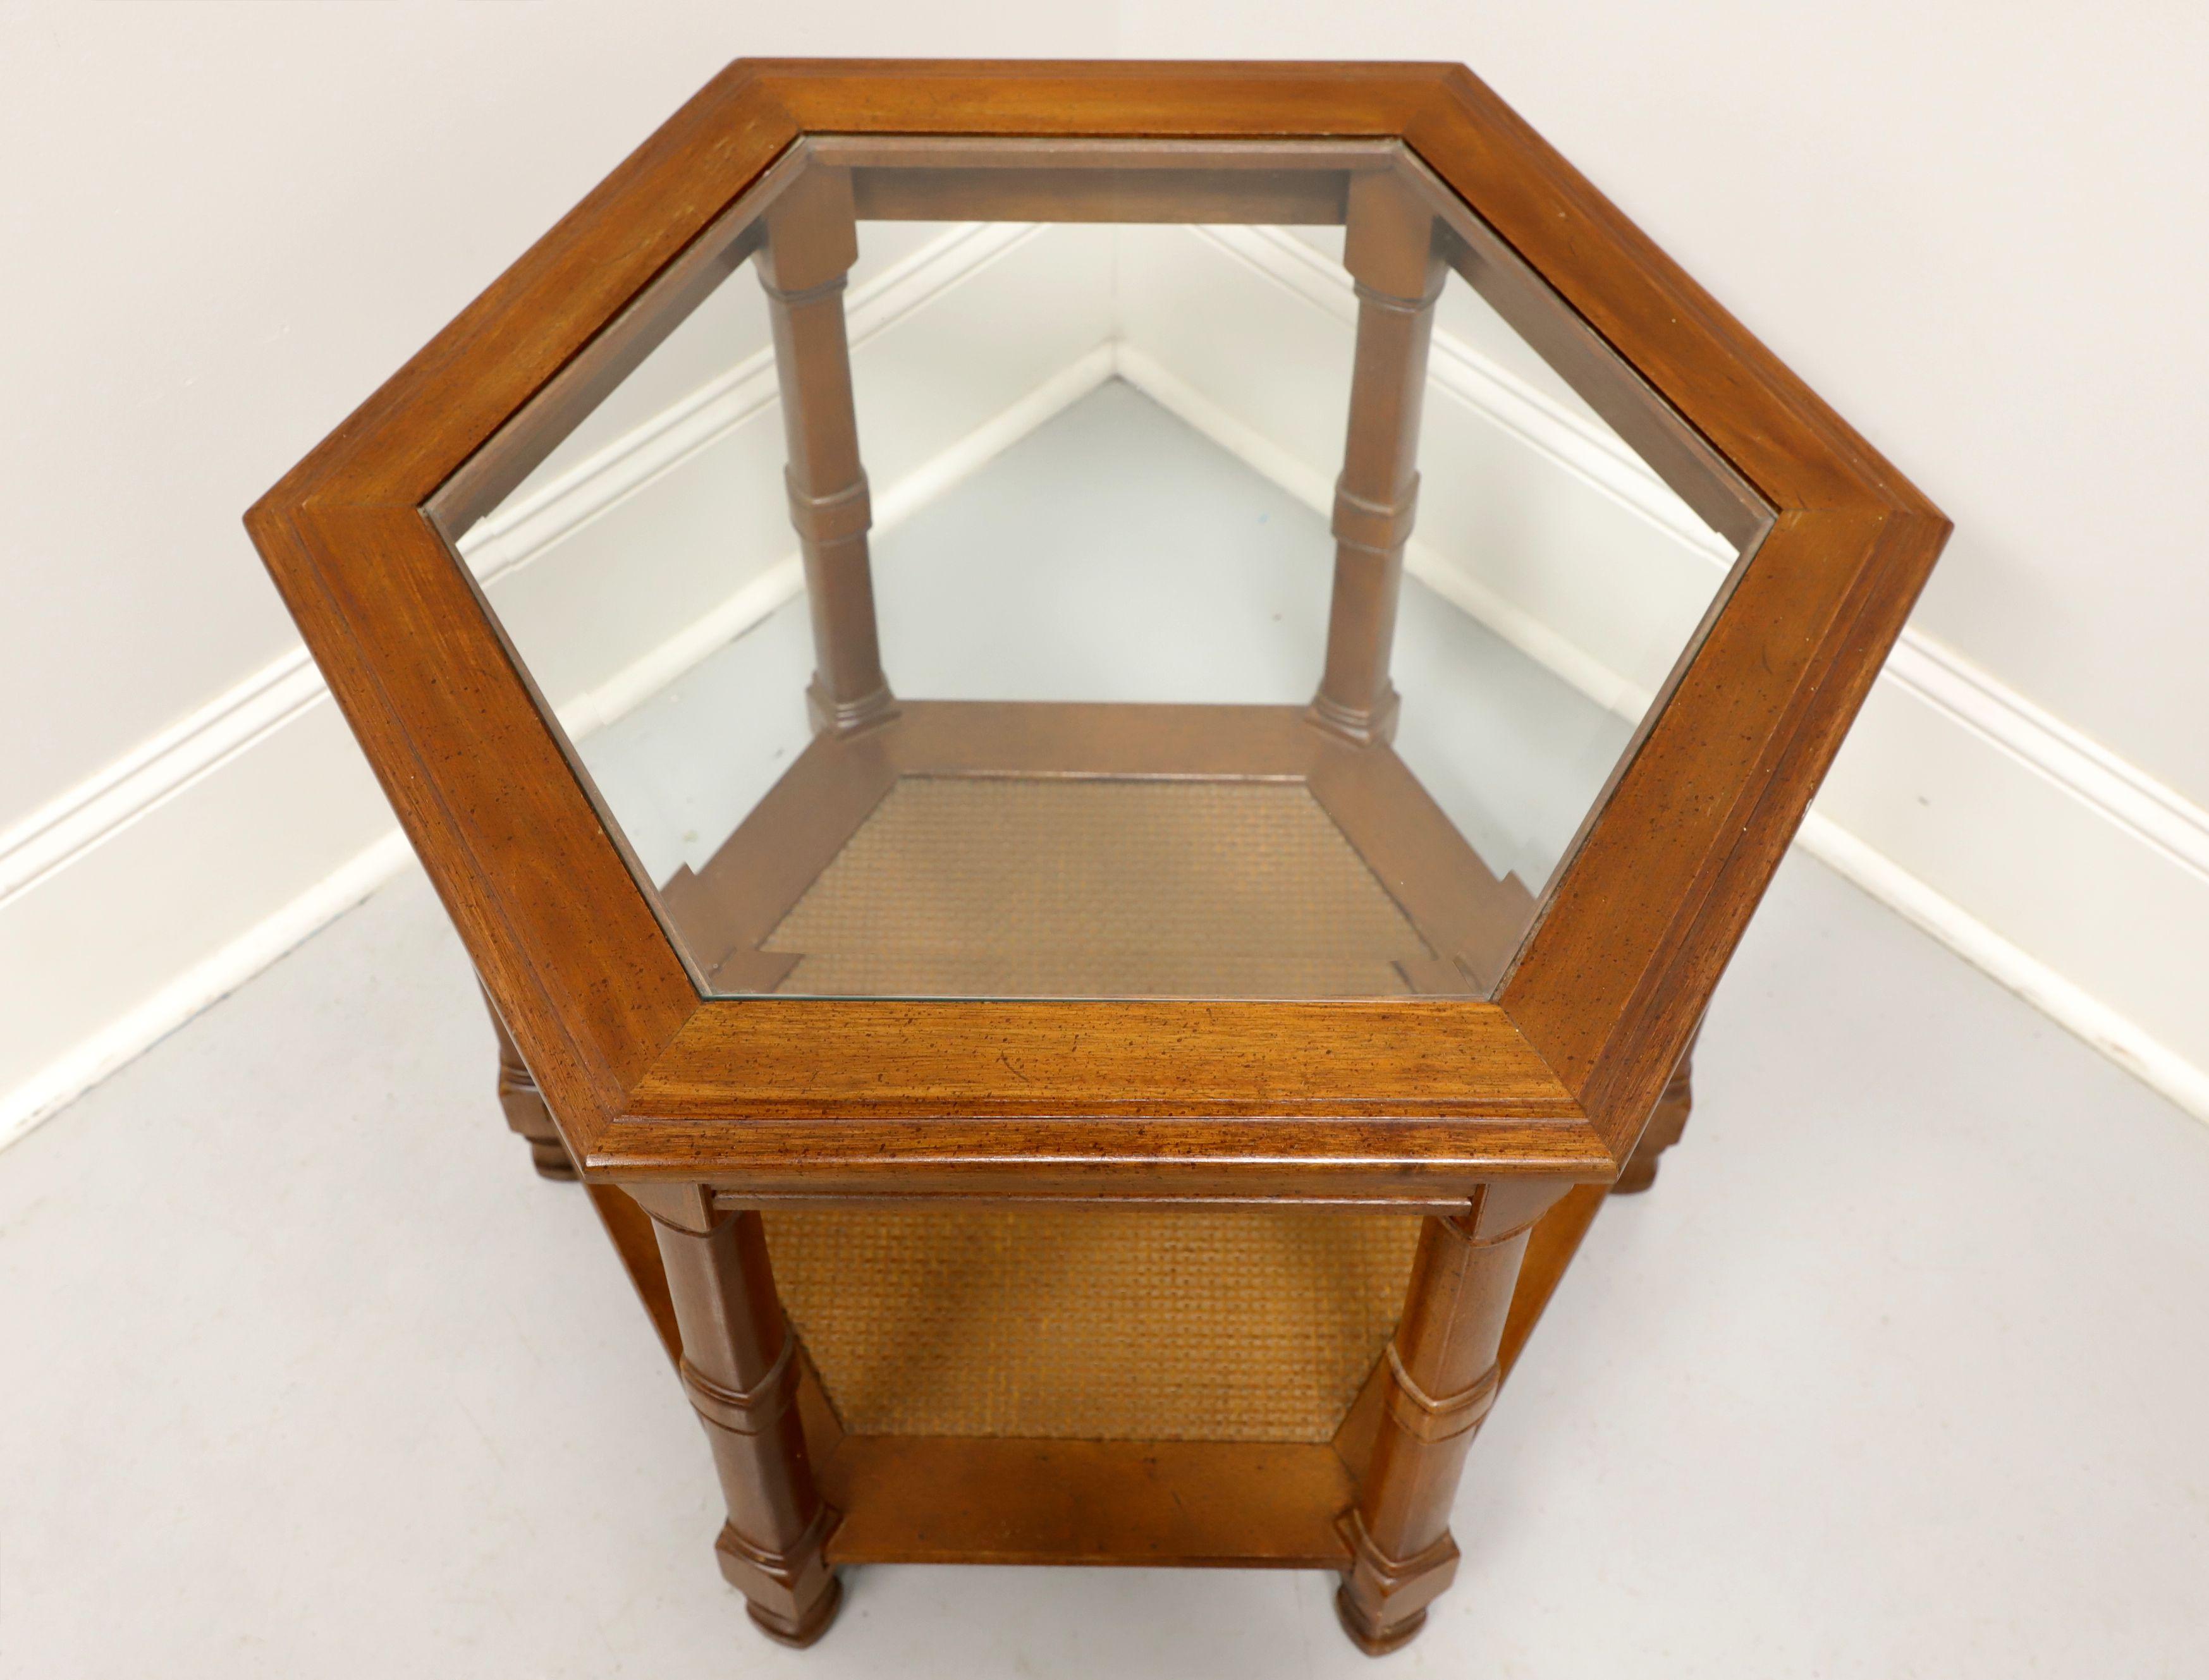 six sided table